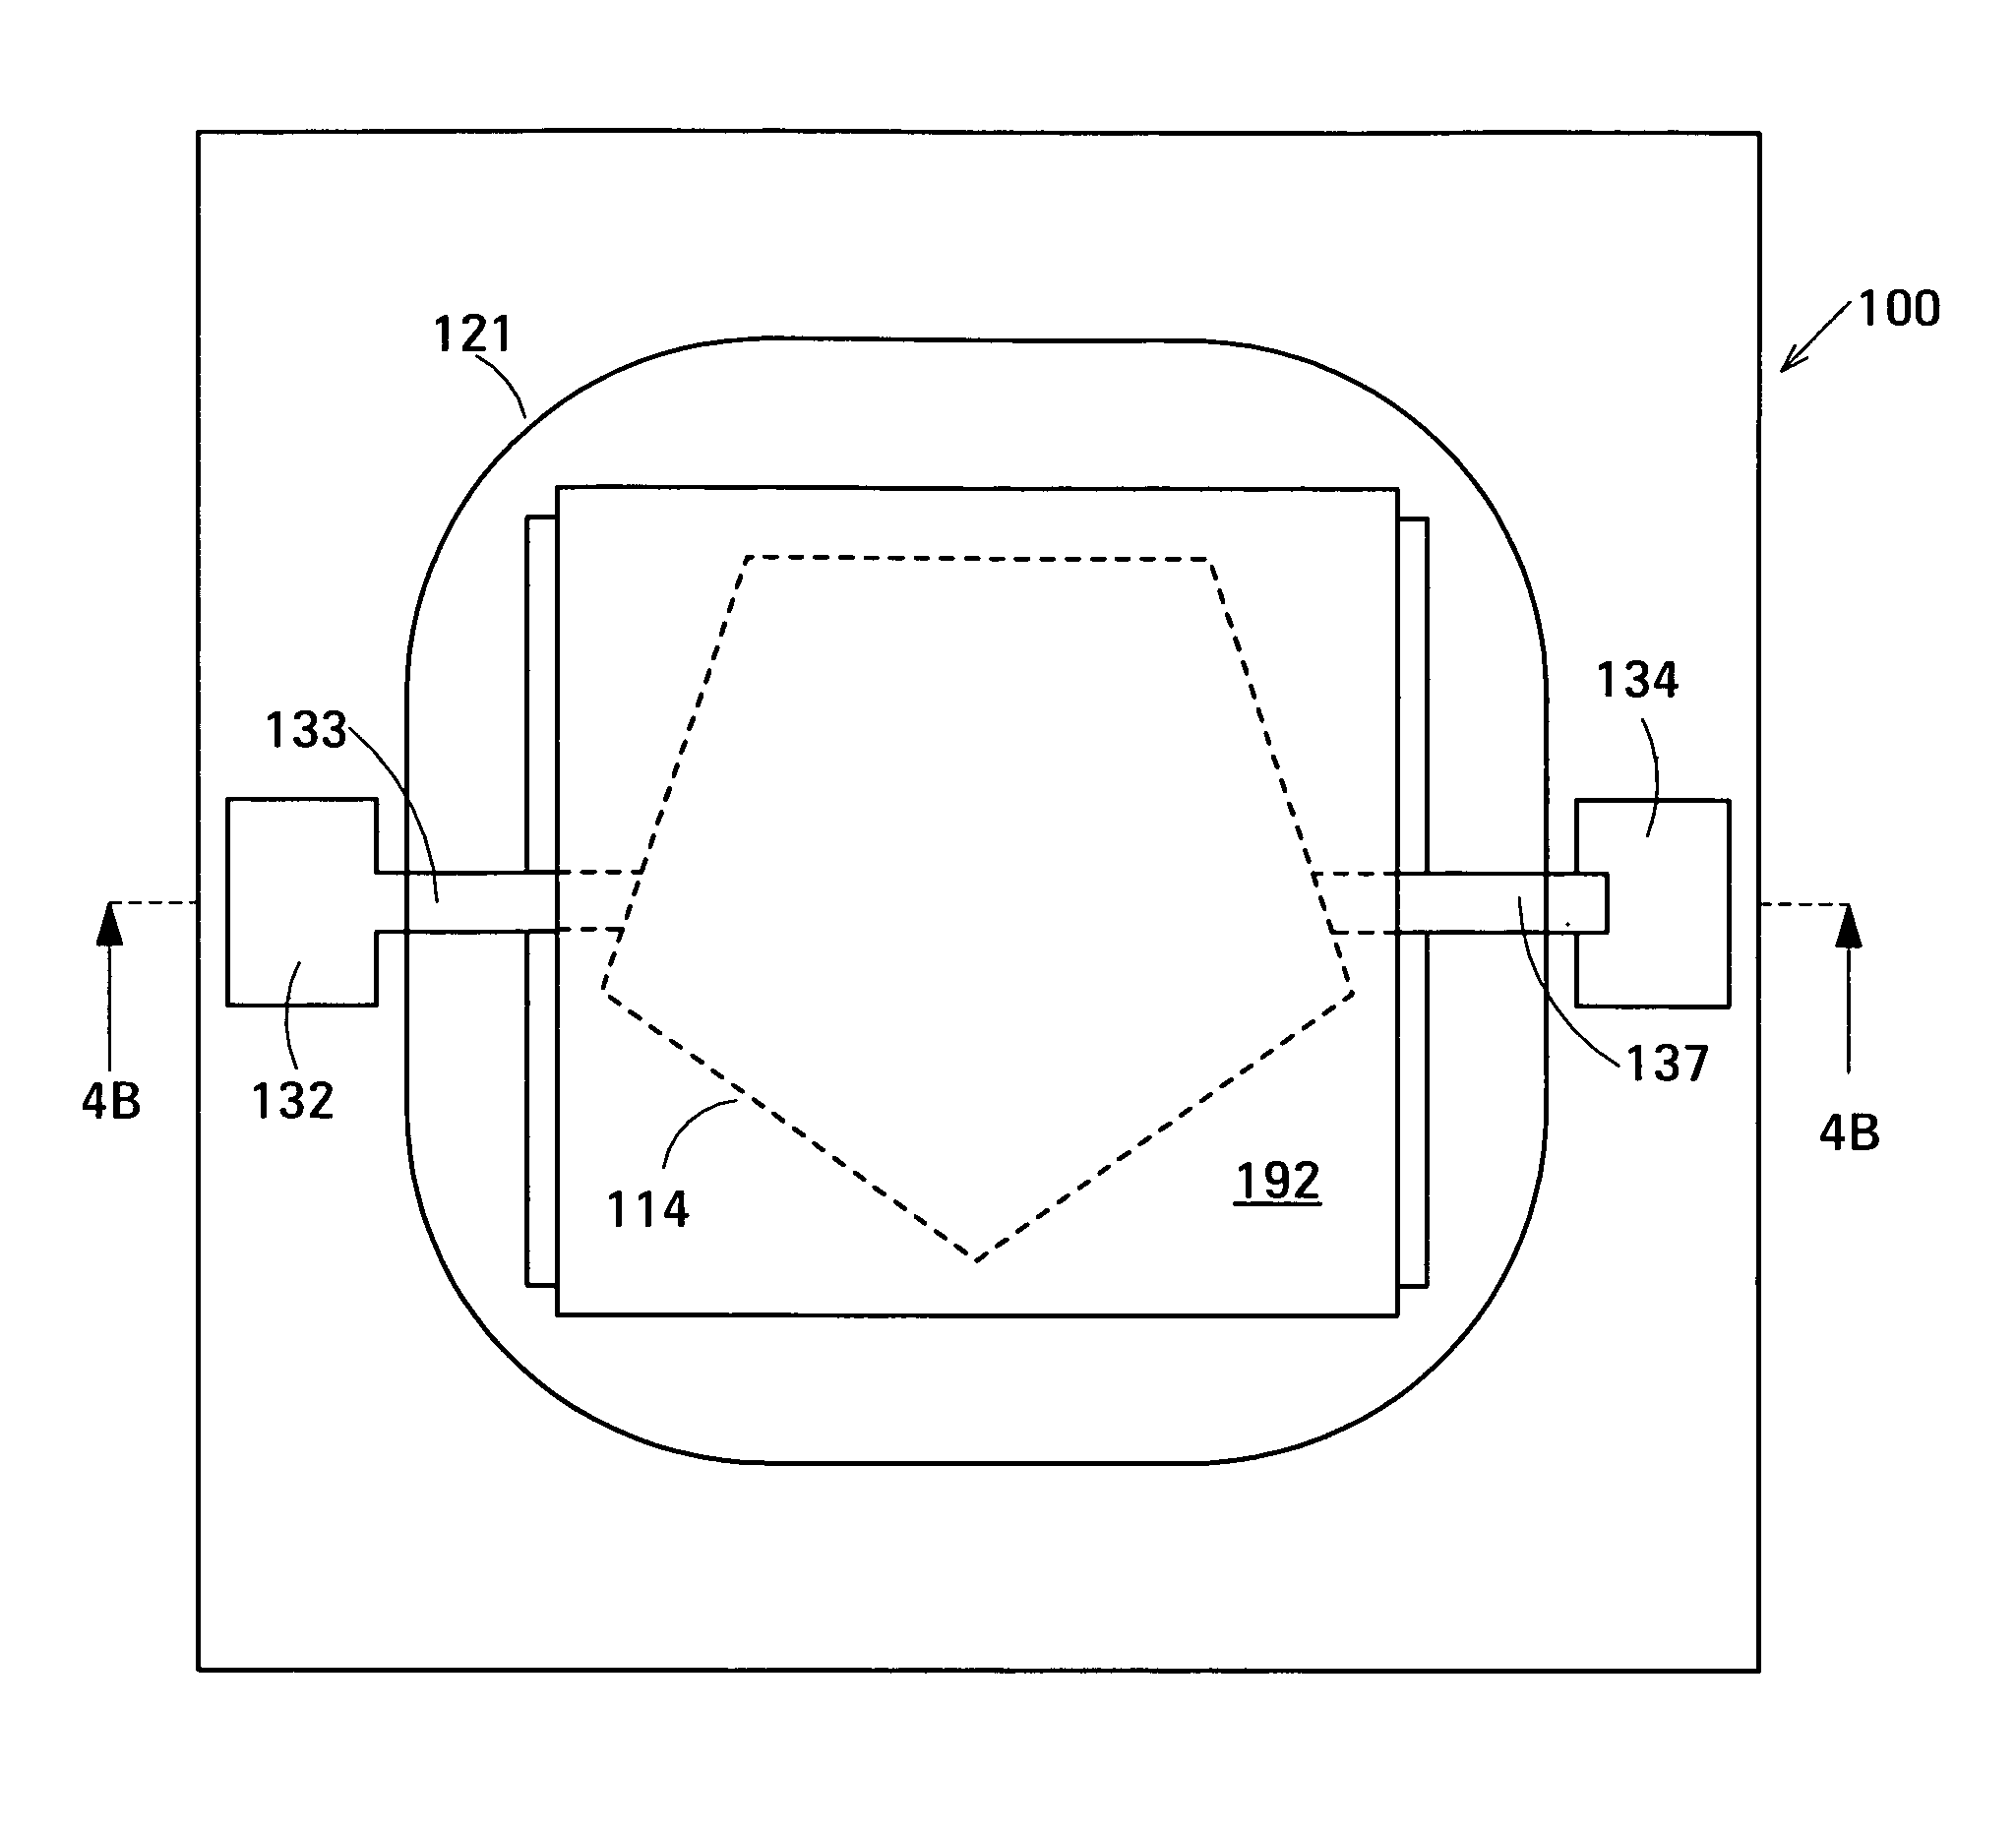 Film bulk acoustic resonator (FBAR) devices with simplified packaging